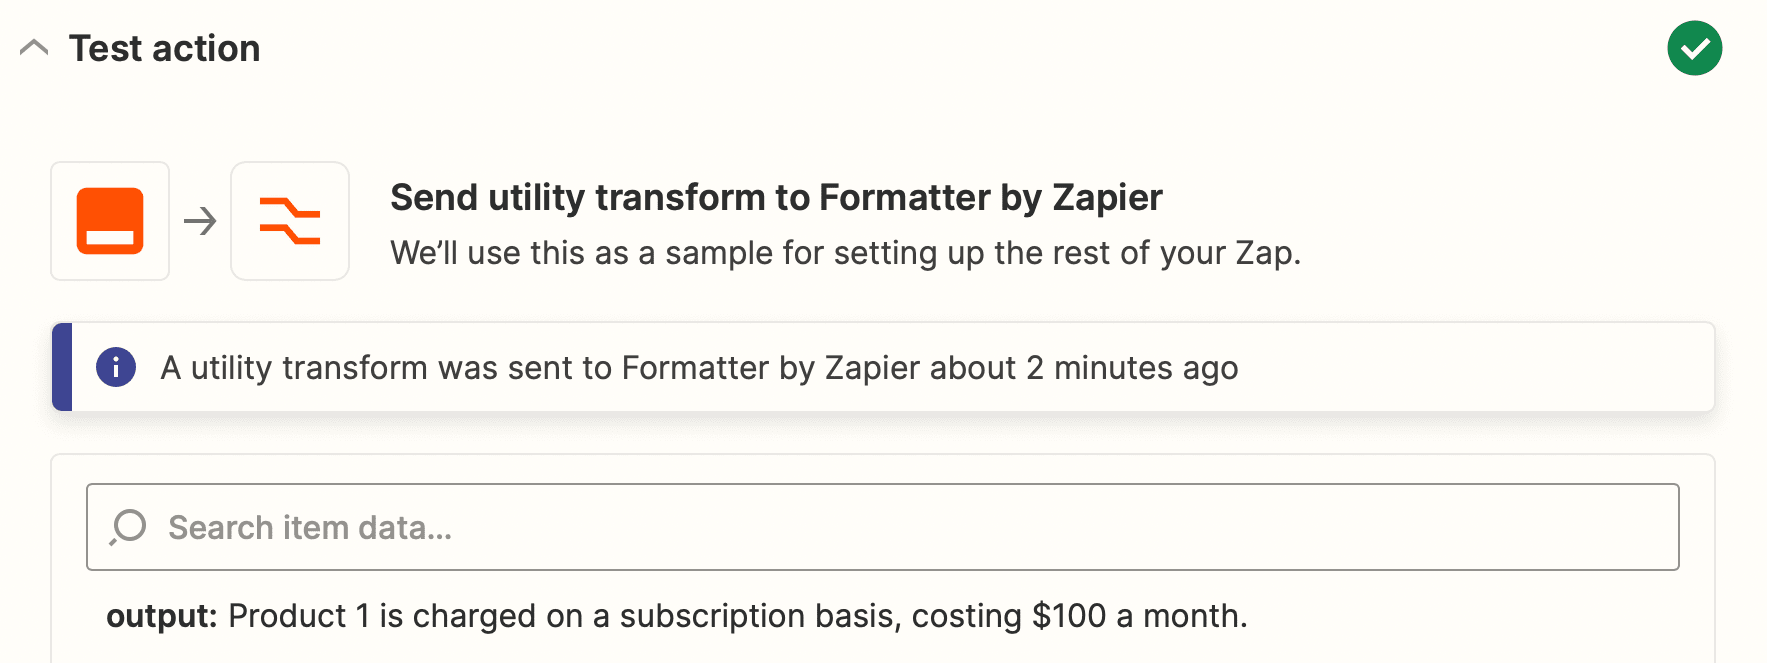 Screenshot of Zapier utility transform test with matched value output